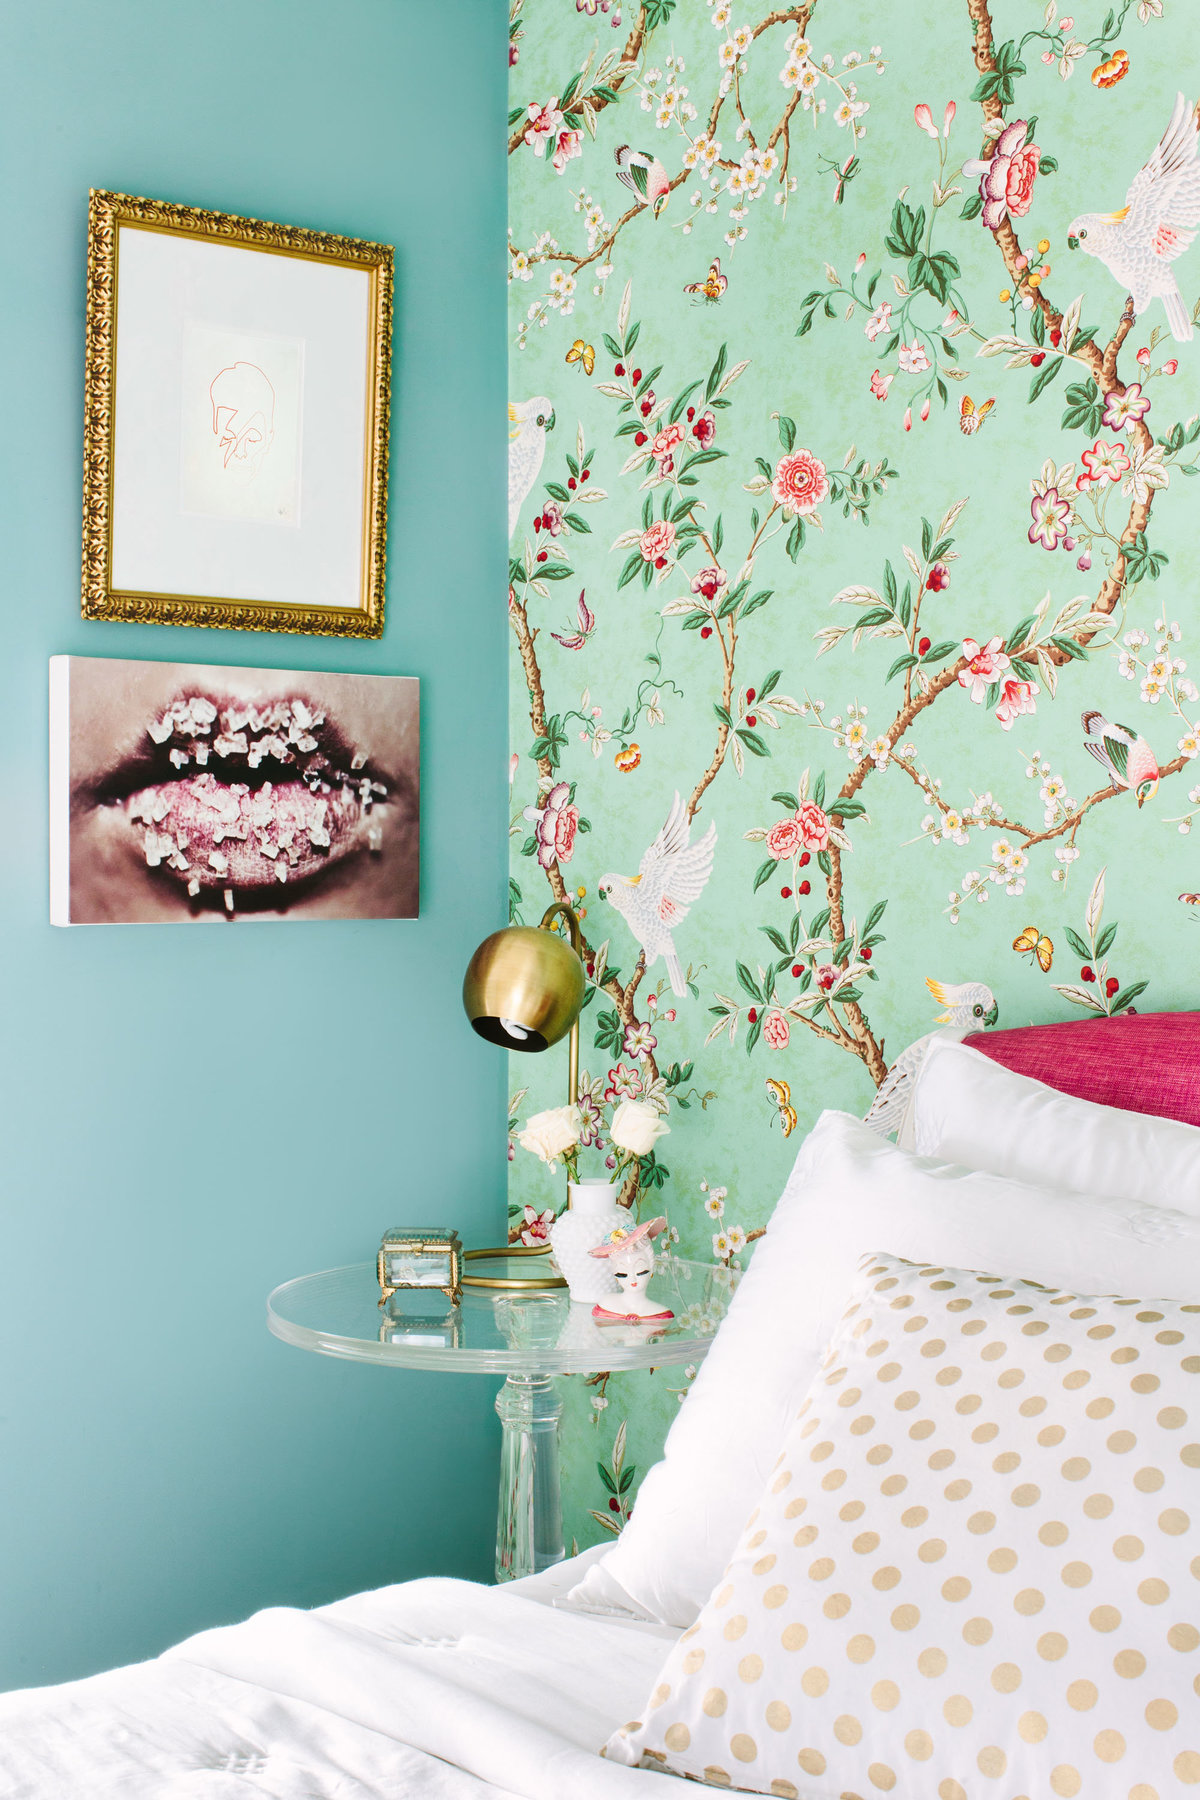 Bedroom with floral wallpaper, pink headboard, and Lucite acrylic nightstand